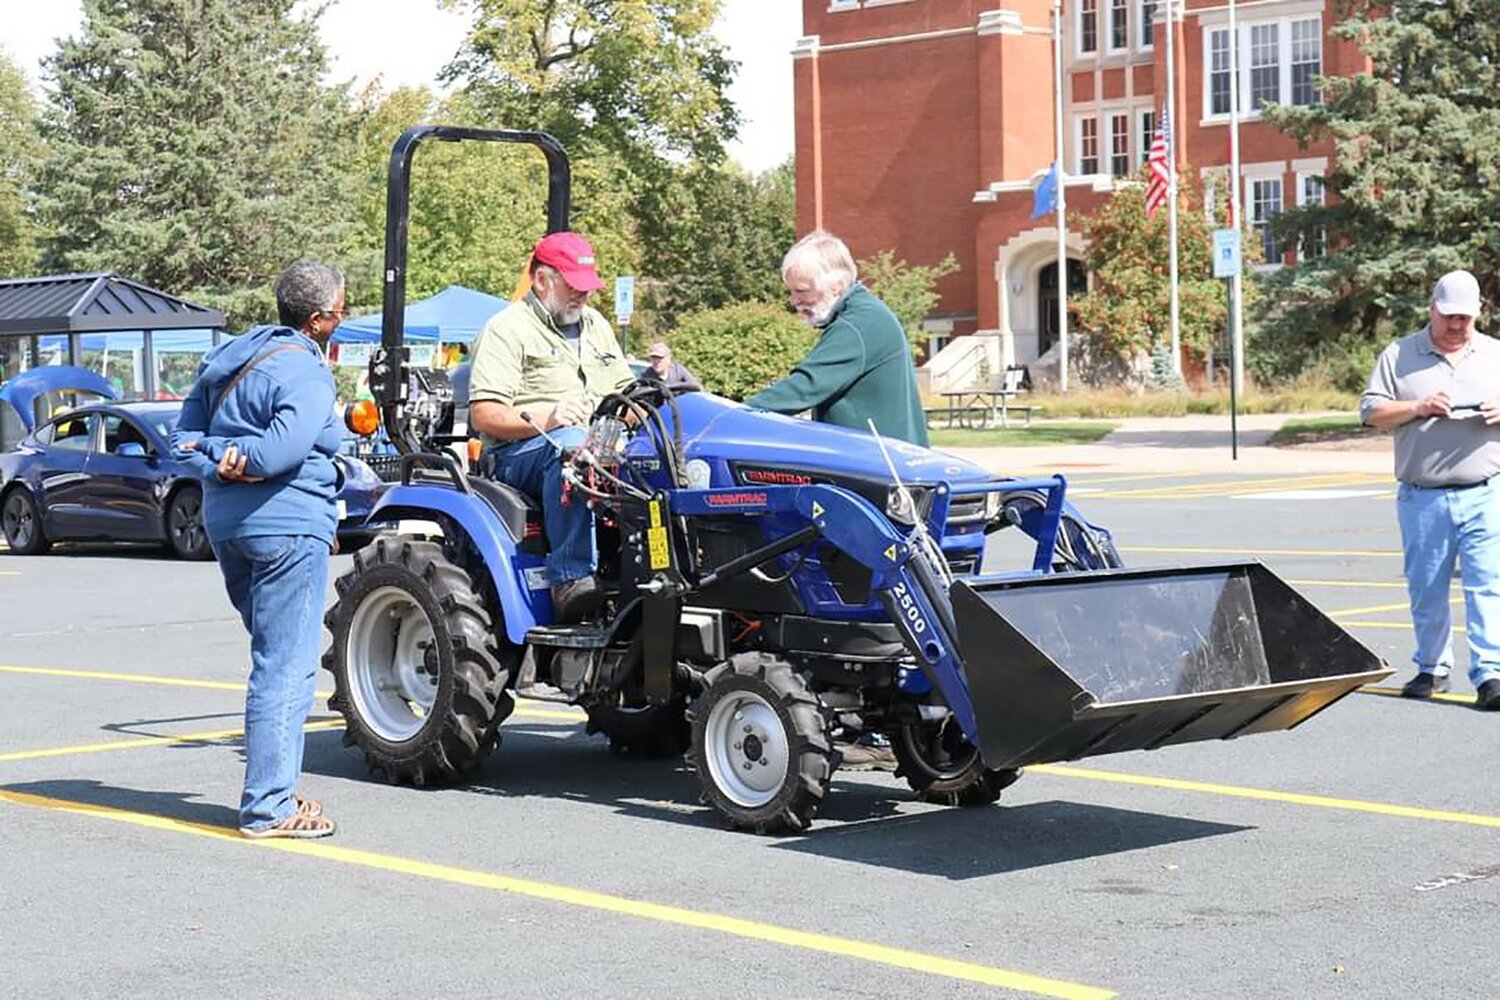 Electric vehicles and electric-powered tools and equipment will be the focus of the Saturday, Sept. 23, Powered by Electricity event at UW-River Falls.